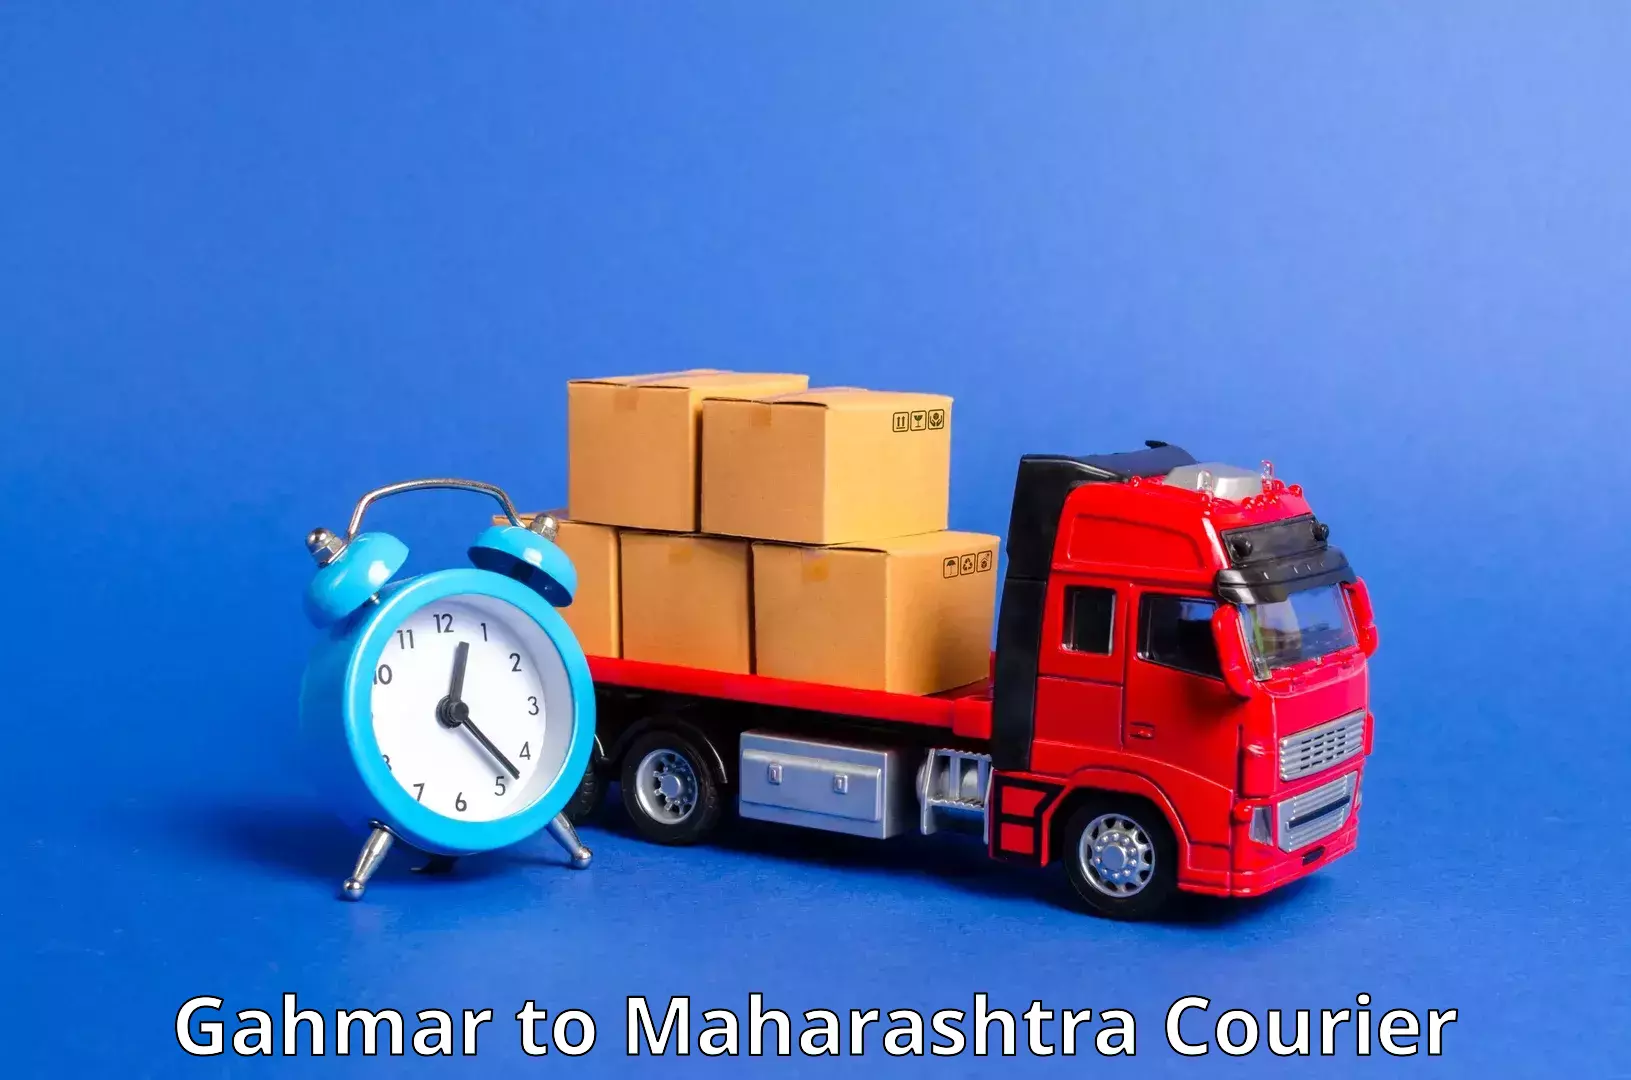 Reliable delivery network Gahmar to Mumbai